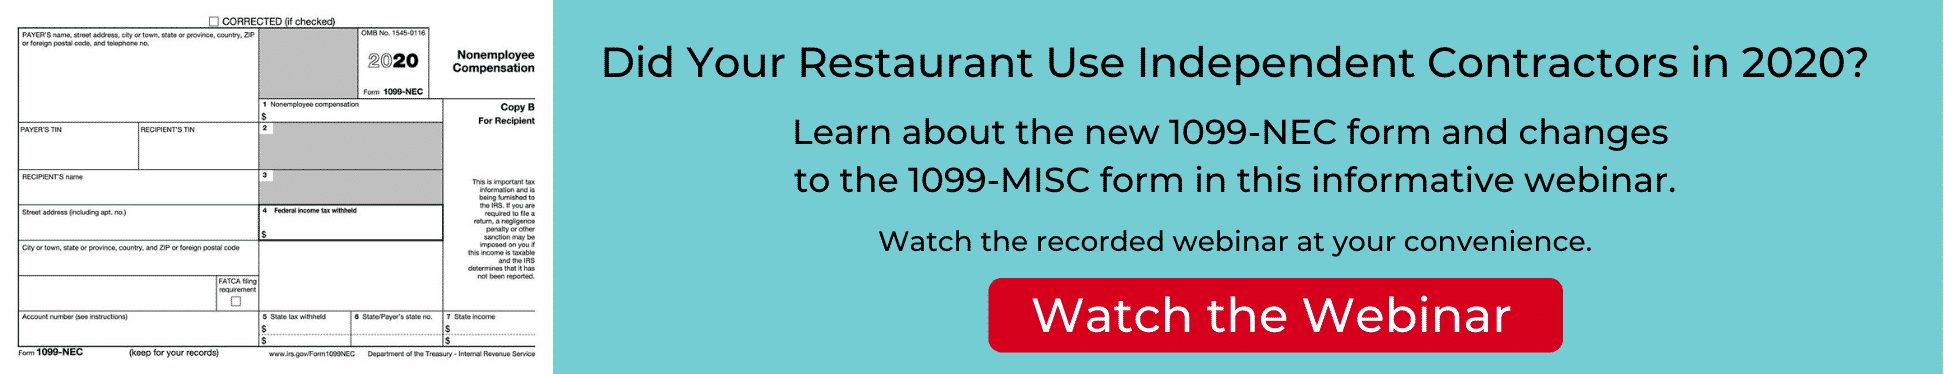 Learn about the 1099-NEC form in this Webinar